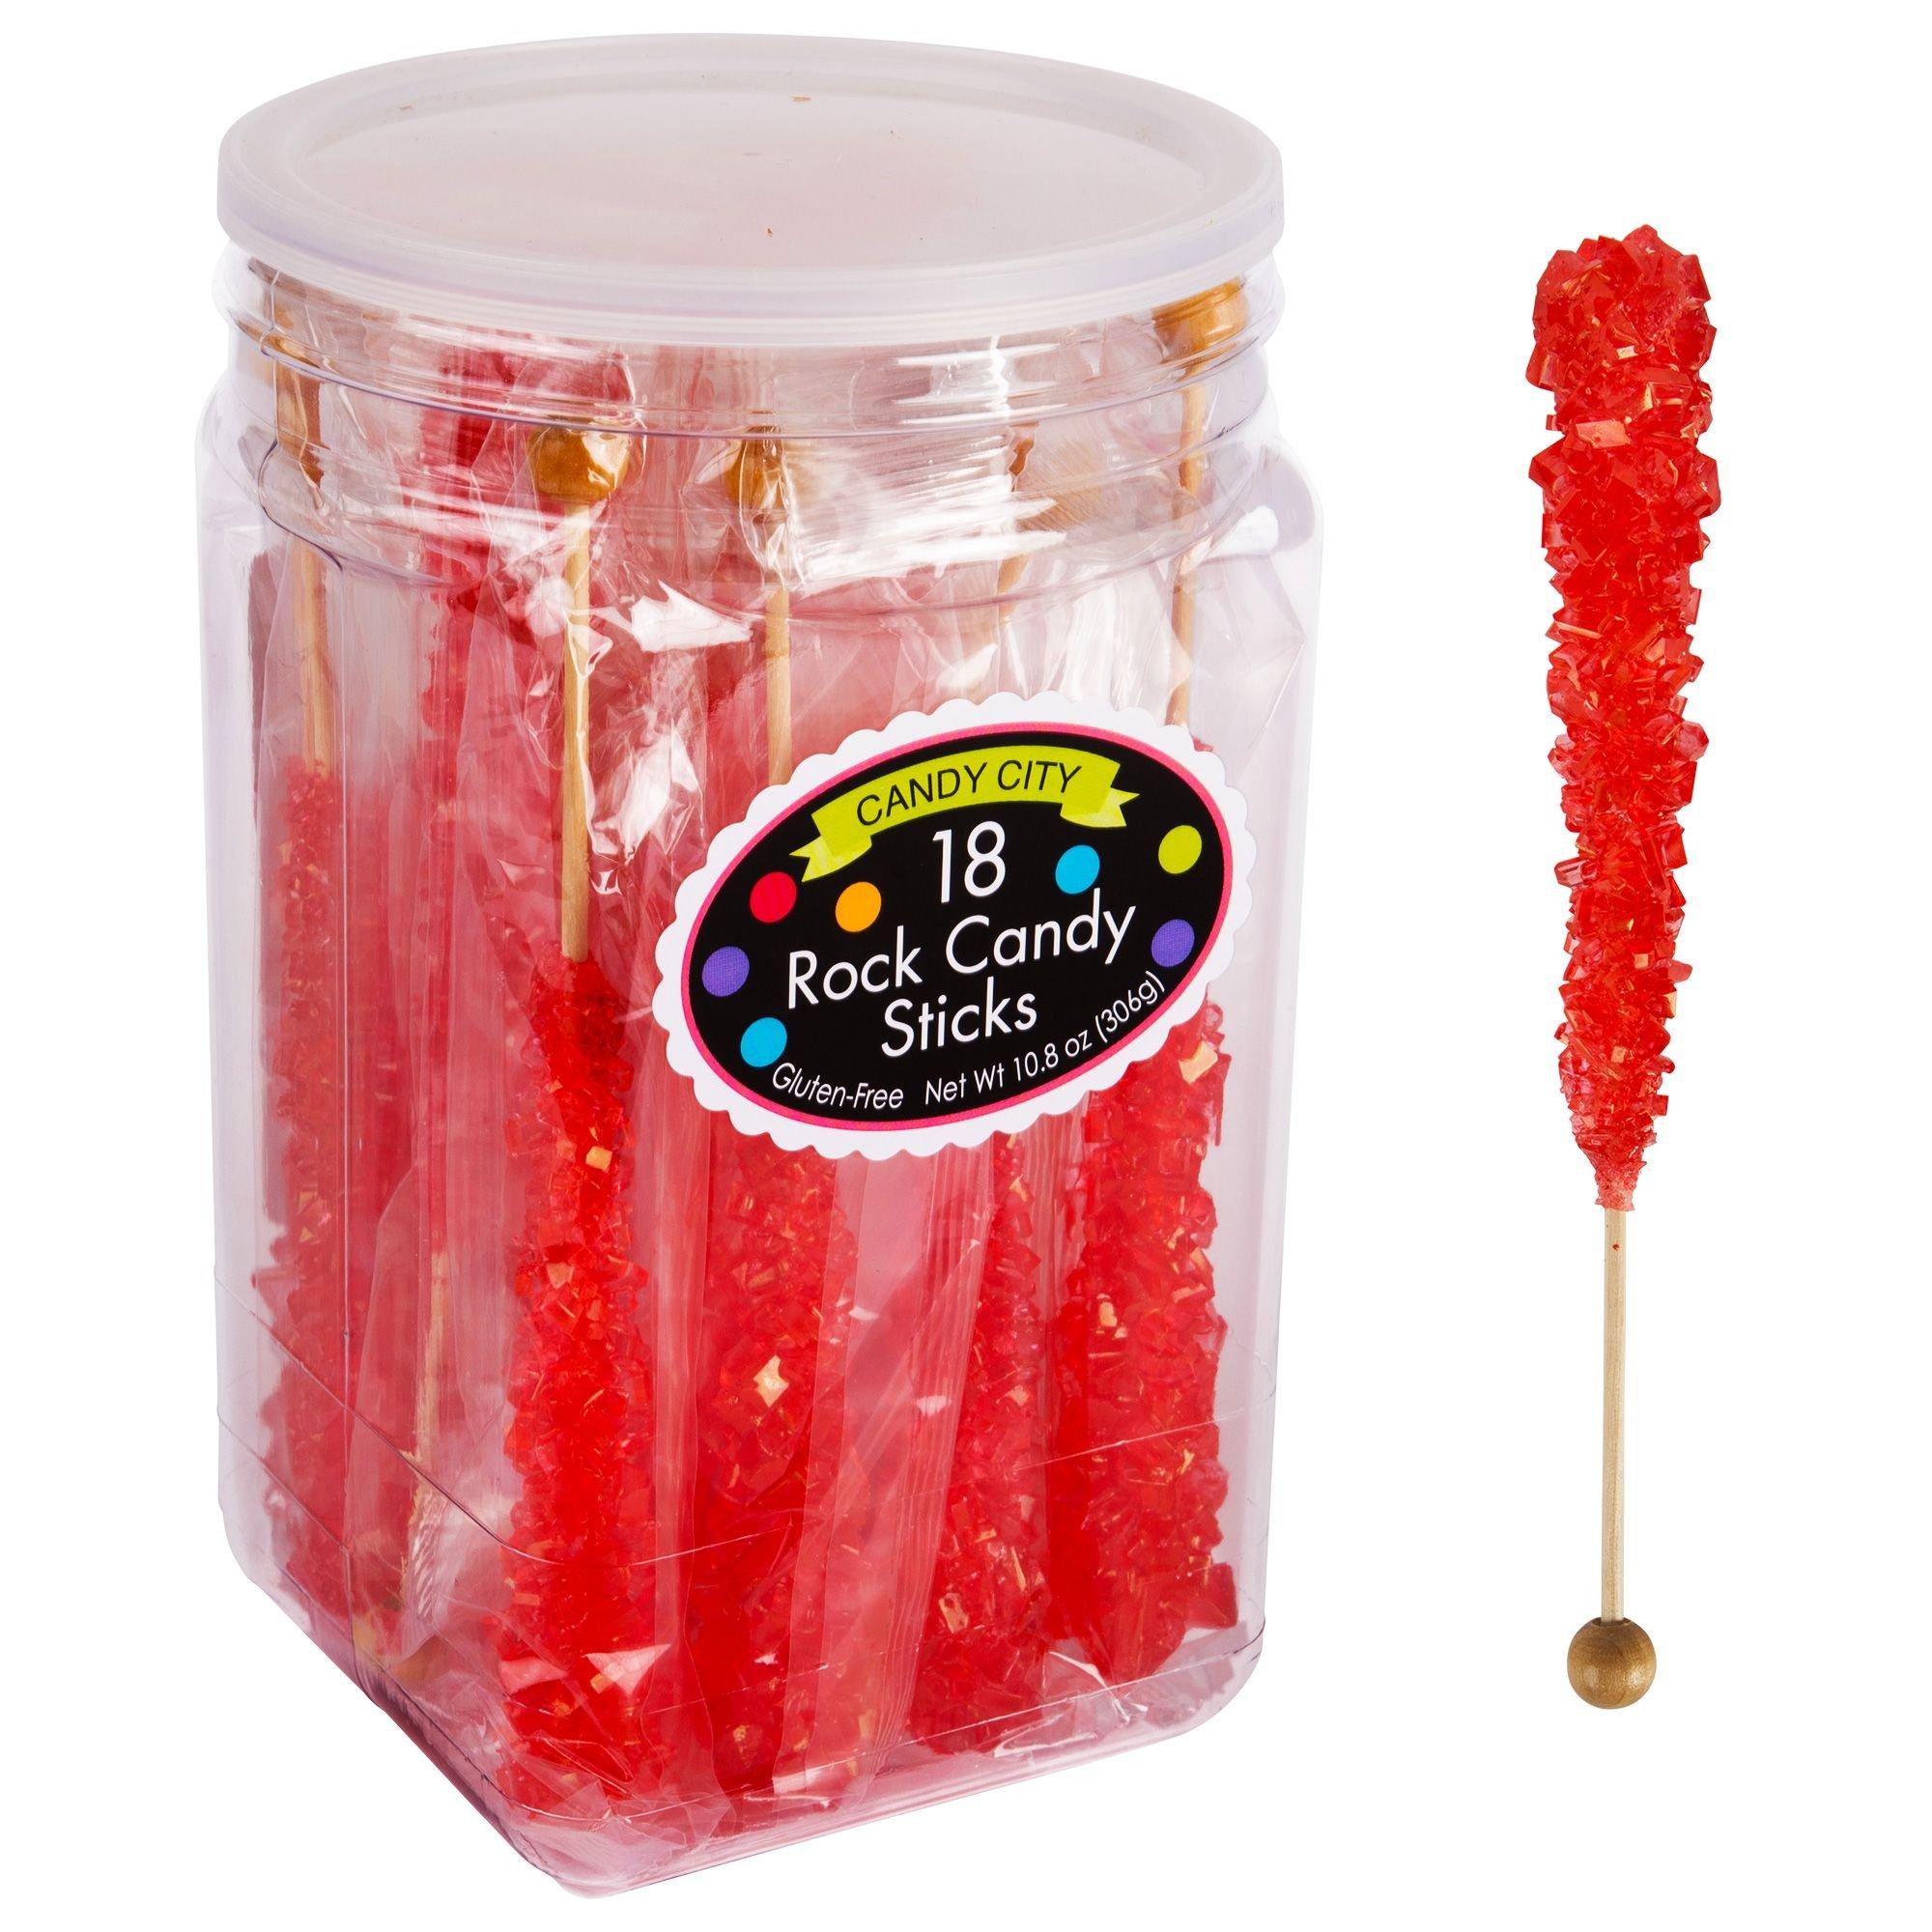 Red Rock Candy Sticks, 18ct | Party City